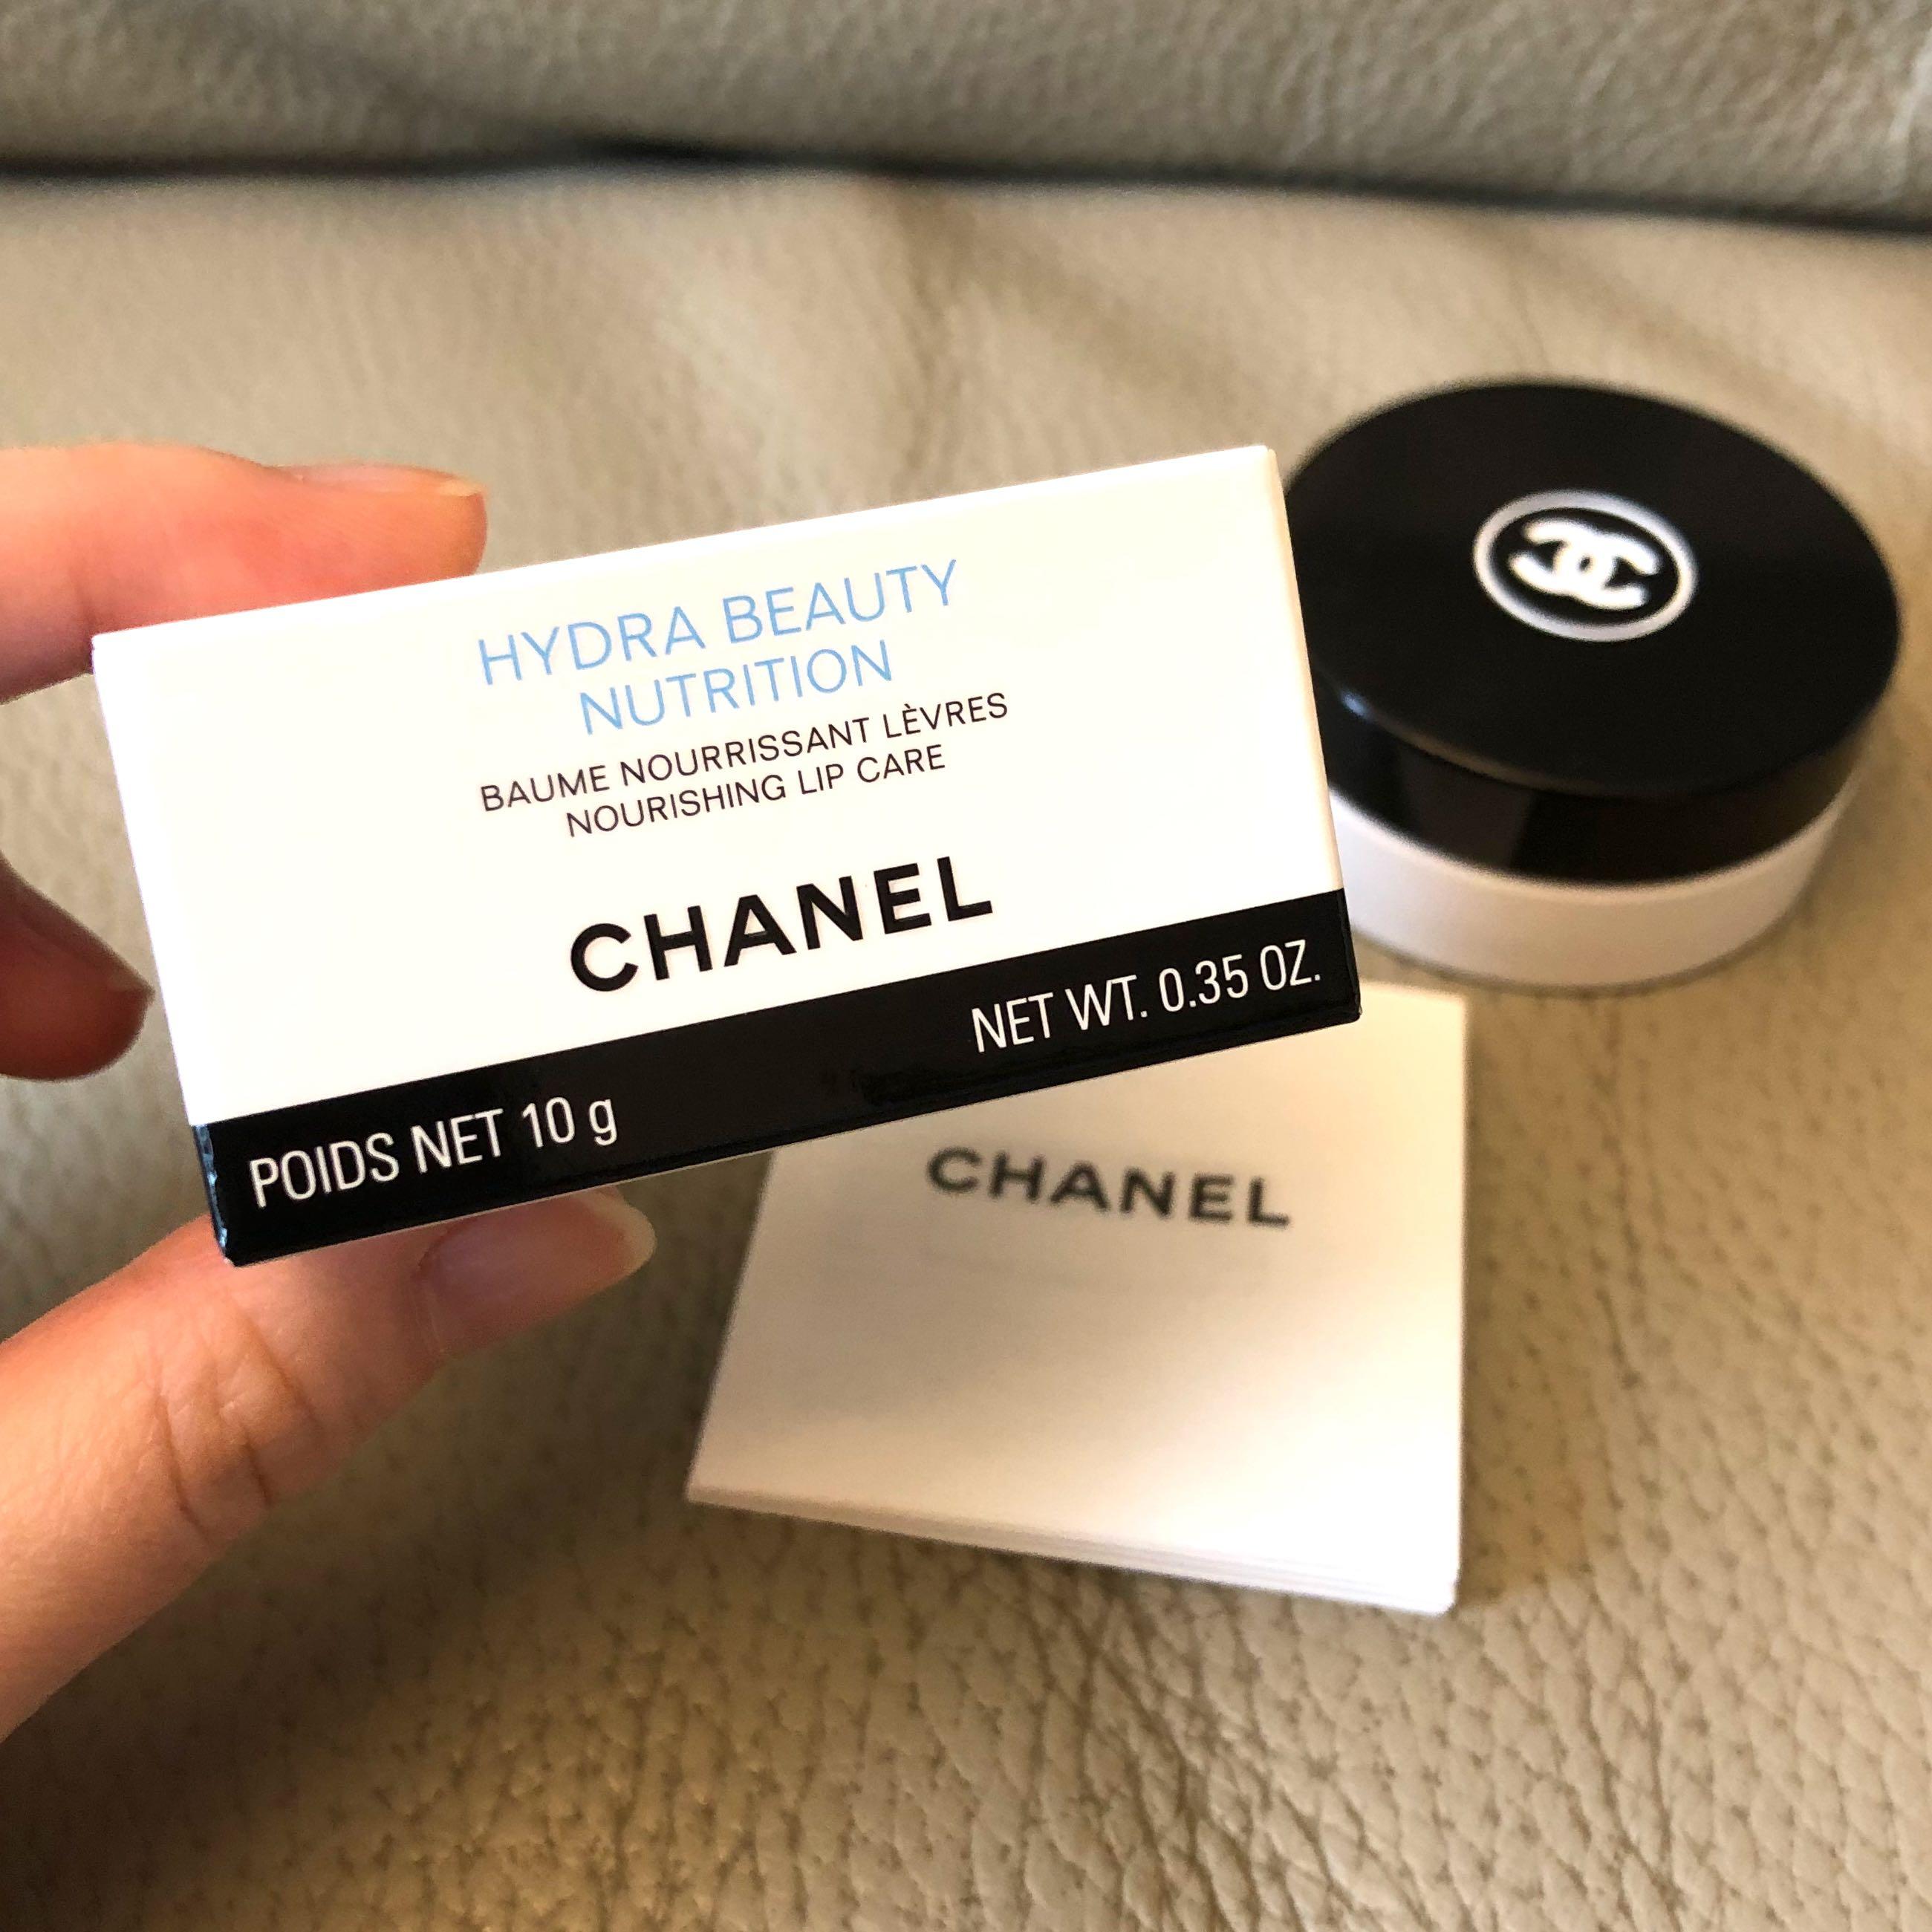 Cheap BNIB Chanel Hydra Beauty Nutrition Nourishing Lip Care / Chanel Lip  Balm / Chanel Lip Care, Beauty & Personal Care, Face, Makeup on Carousell